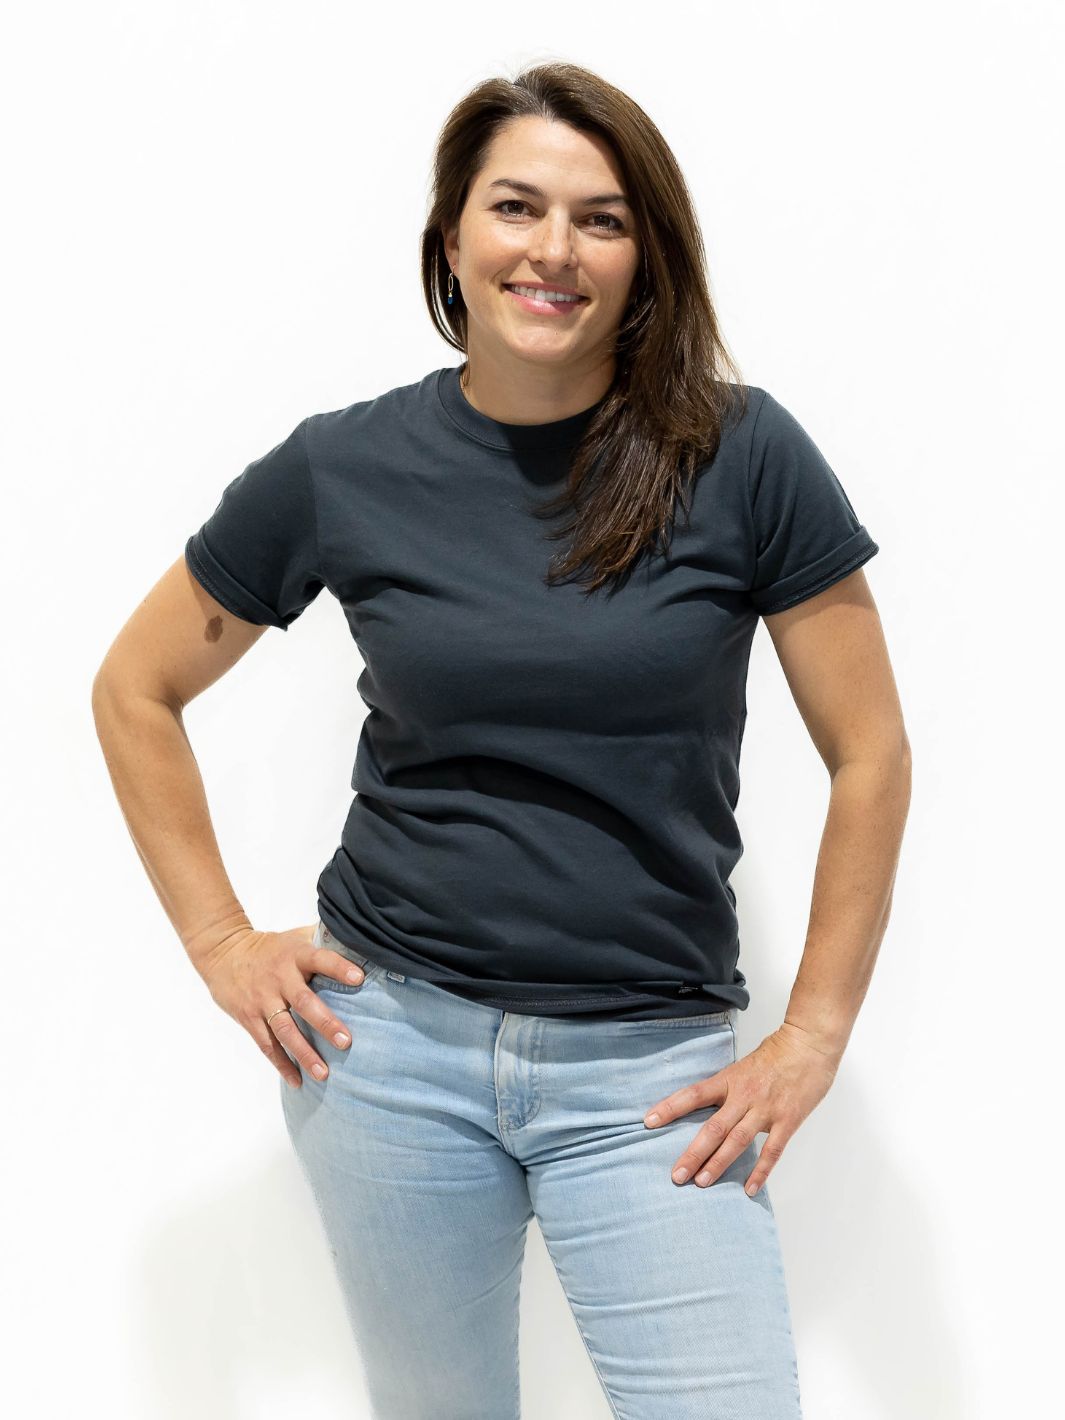 Individual wearing a Made in Canada charcoal shirt made of a premium 50/50 blend of cotton and polyester. This shirt is charcoal in colour and comes in six sizes, ranging from XS to 2XL